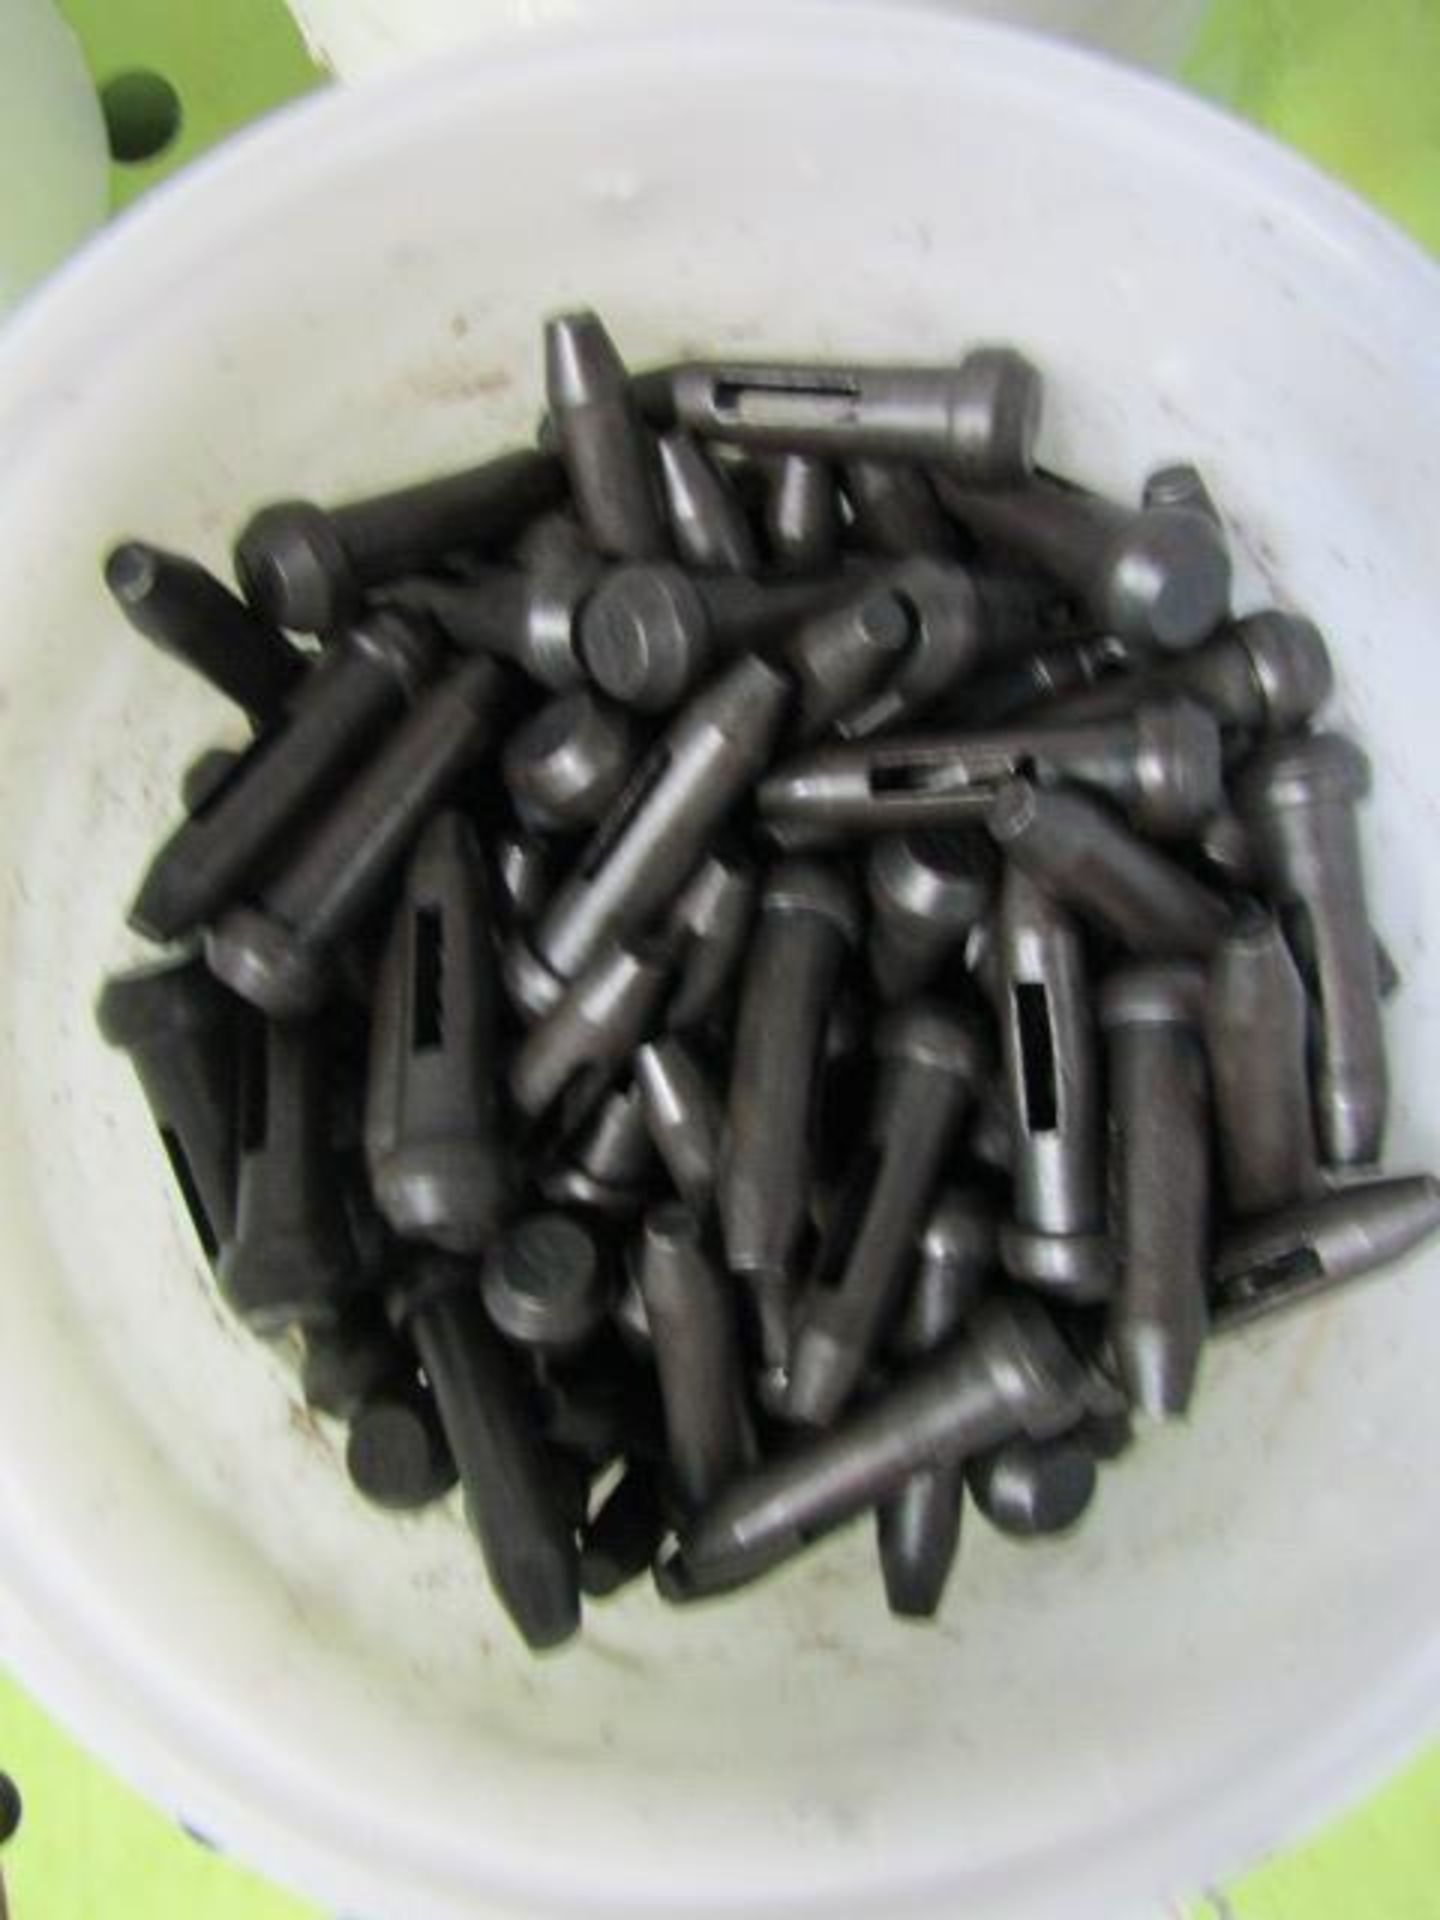 Bucket of (250) NEW Pins, Located in Mt. Pleasant, IA - Image 2 of 2